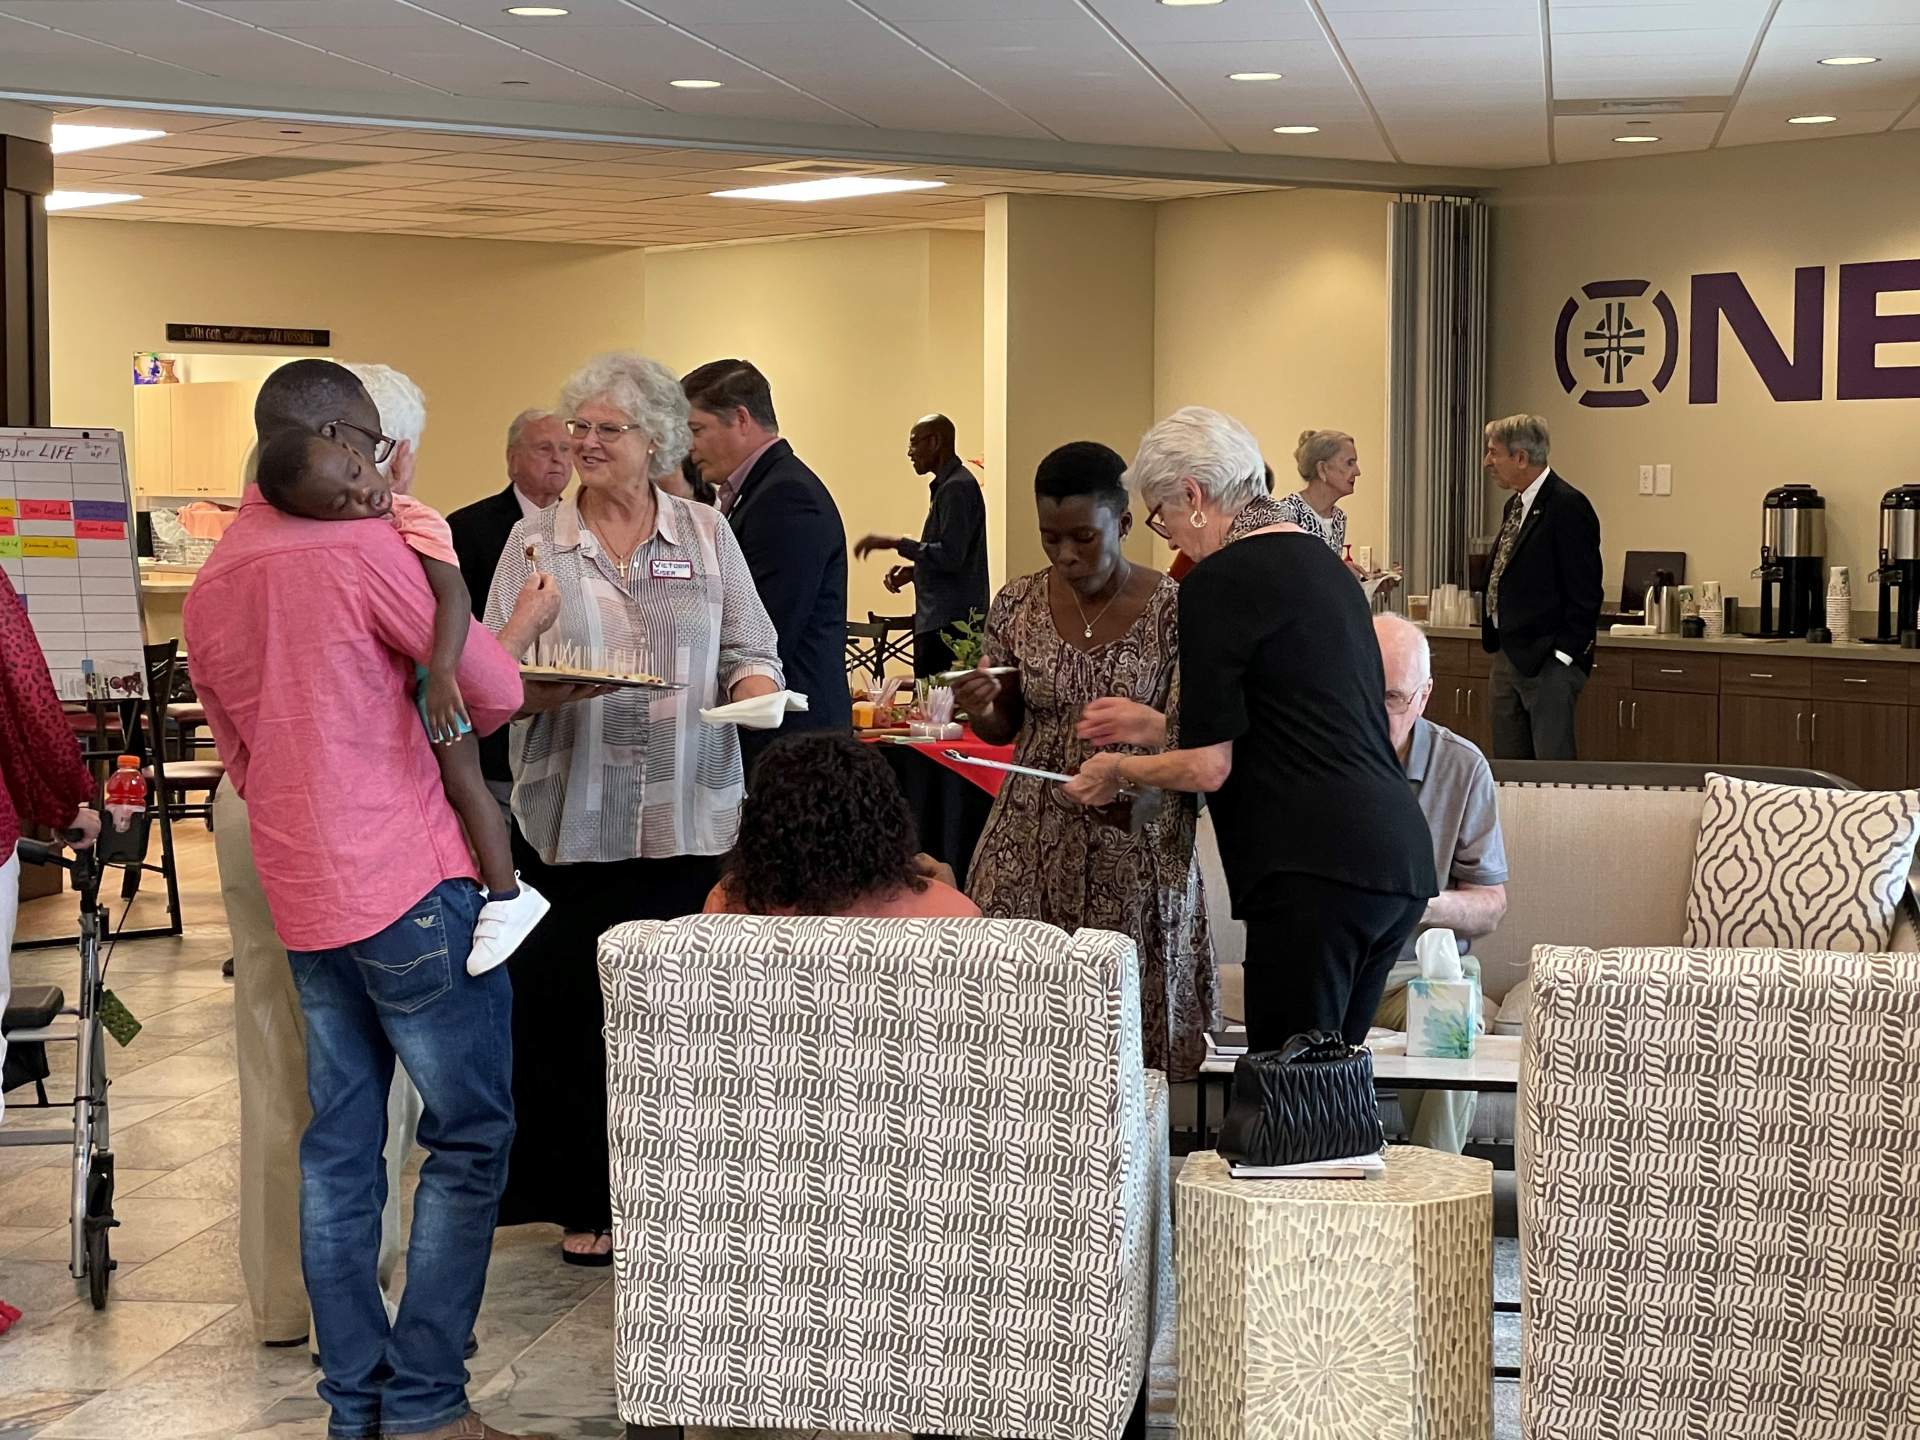 Diverse group of adults conversing and holding papers in a well-lit conference room with a coffee station in the background.